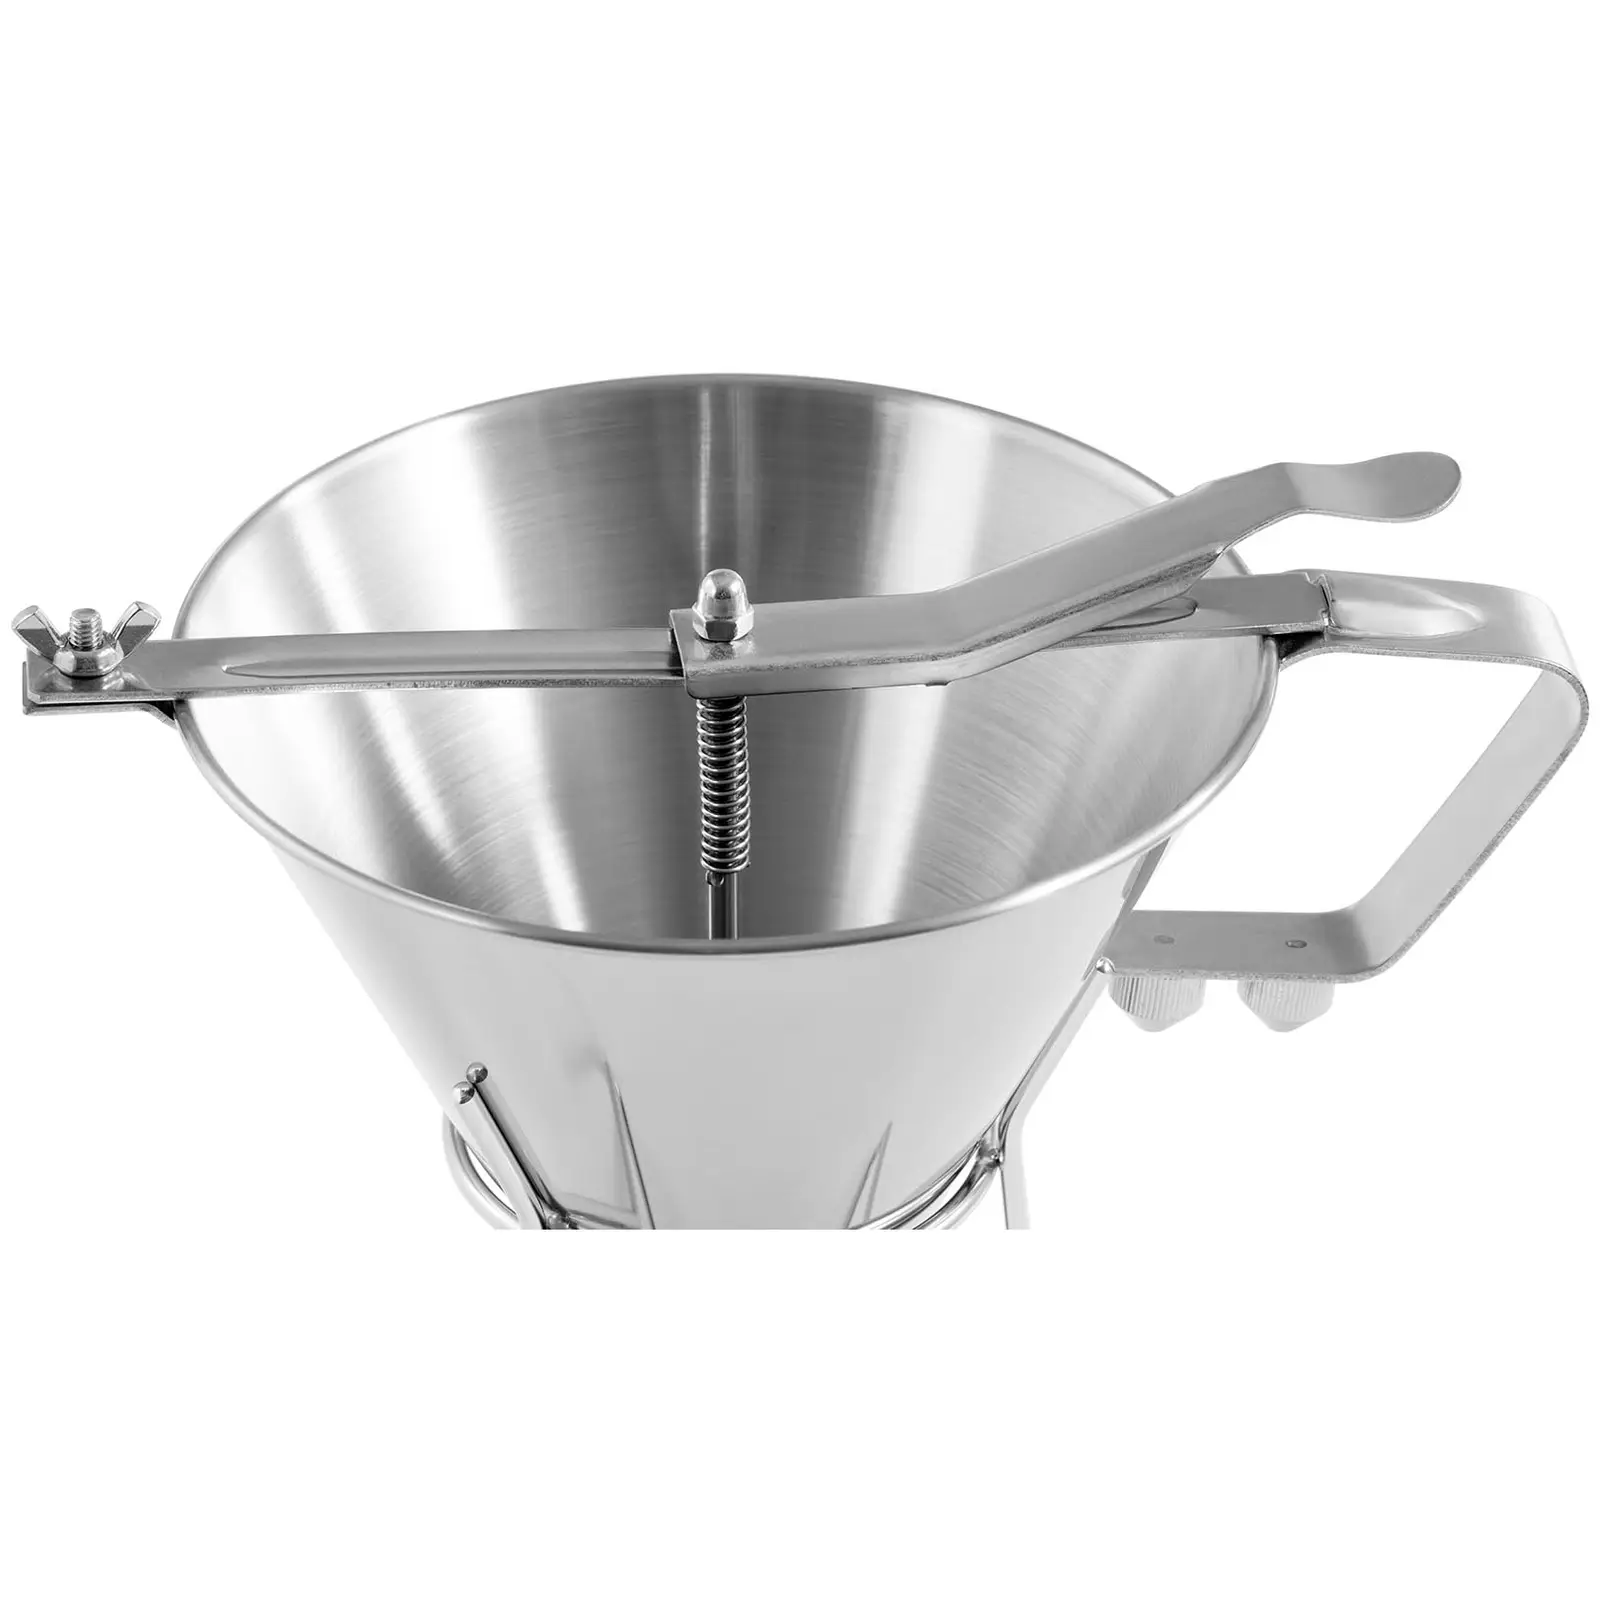 Filling funnel - 1.8 L - stainless steel - 3 filling tips - stand with collecting tray